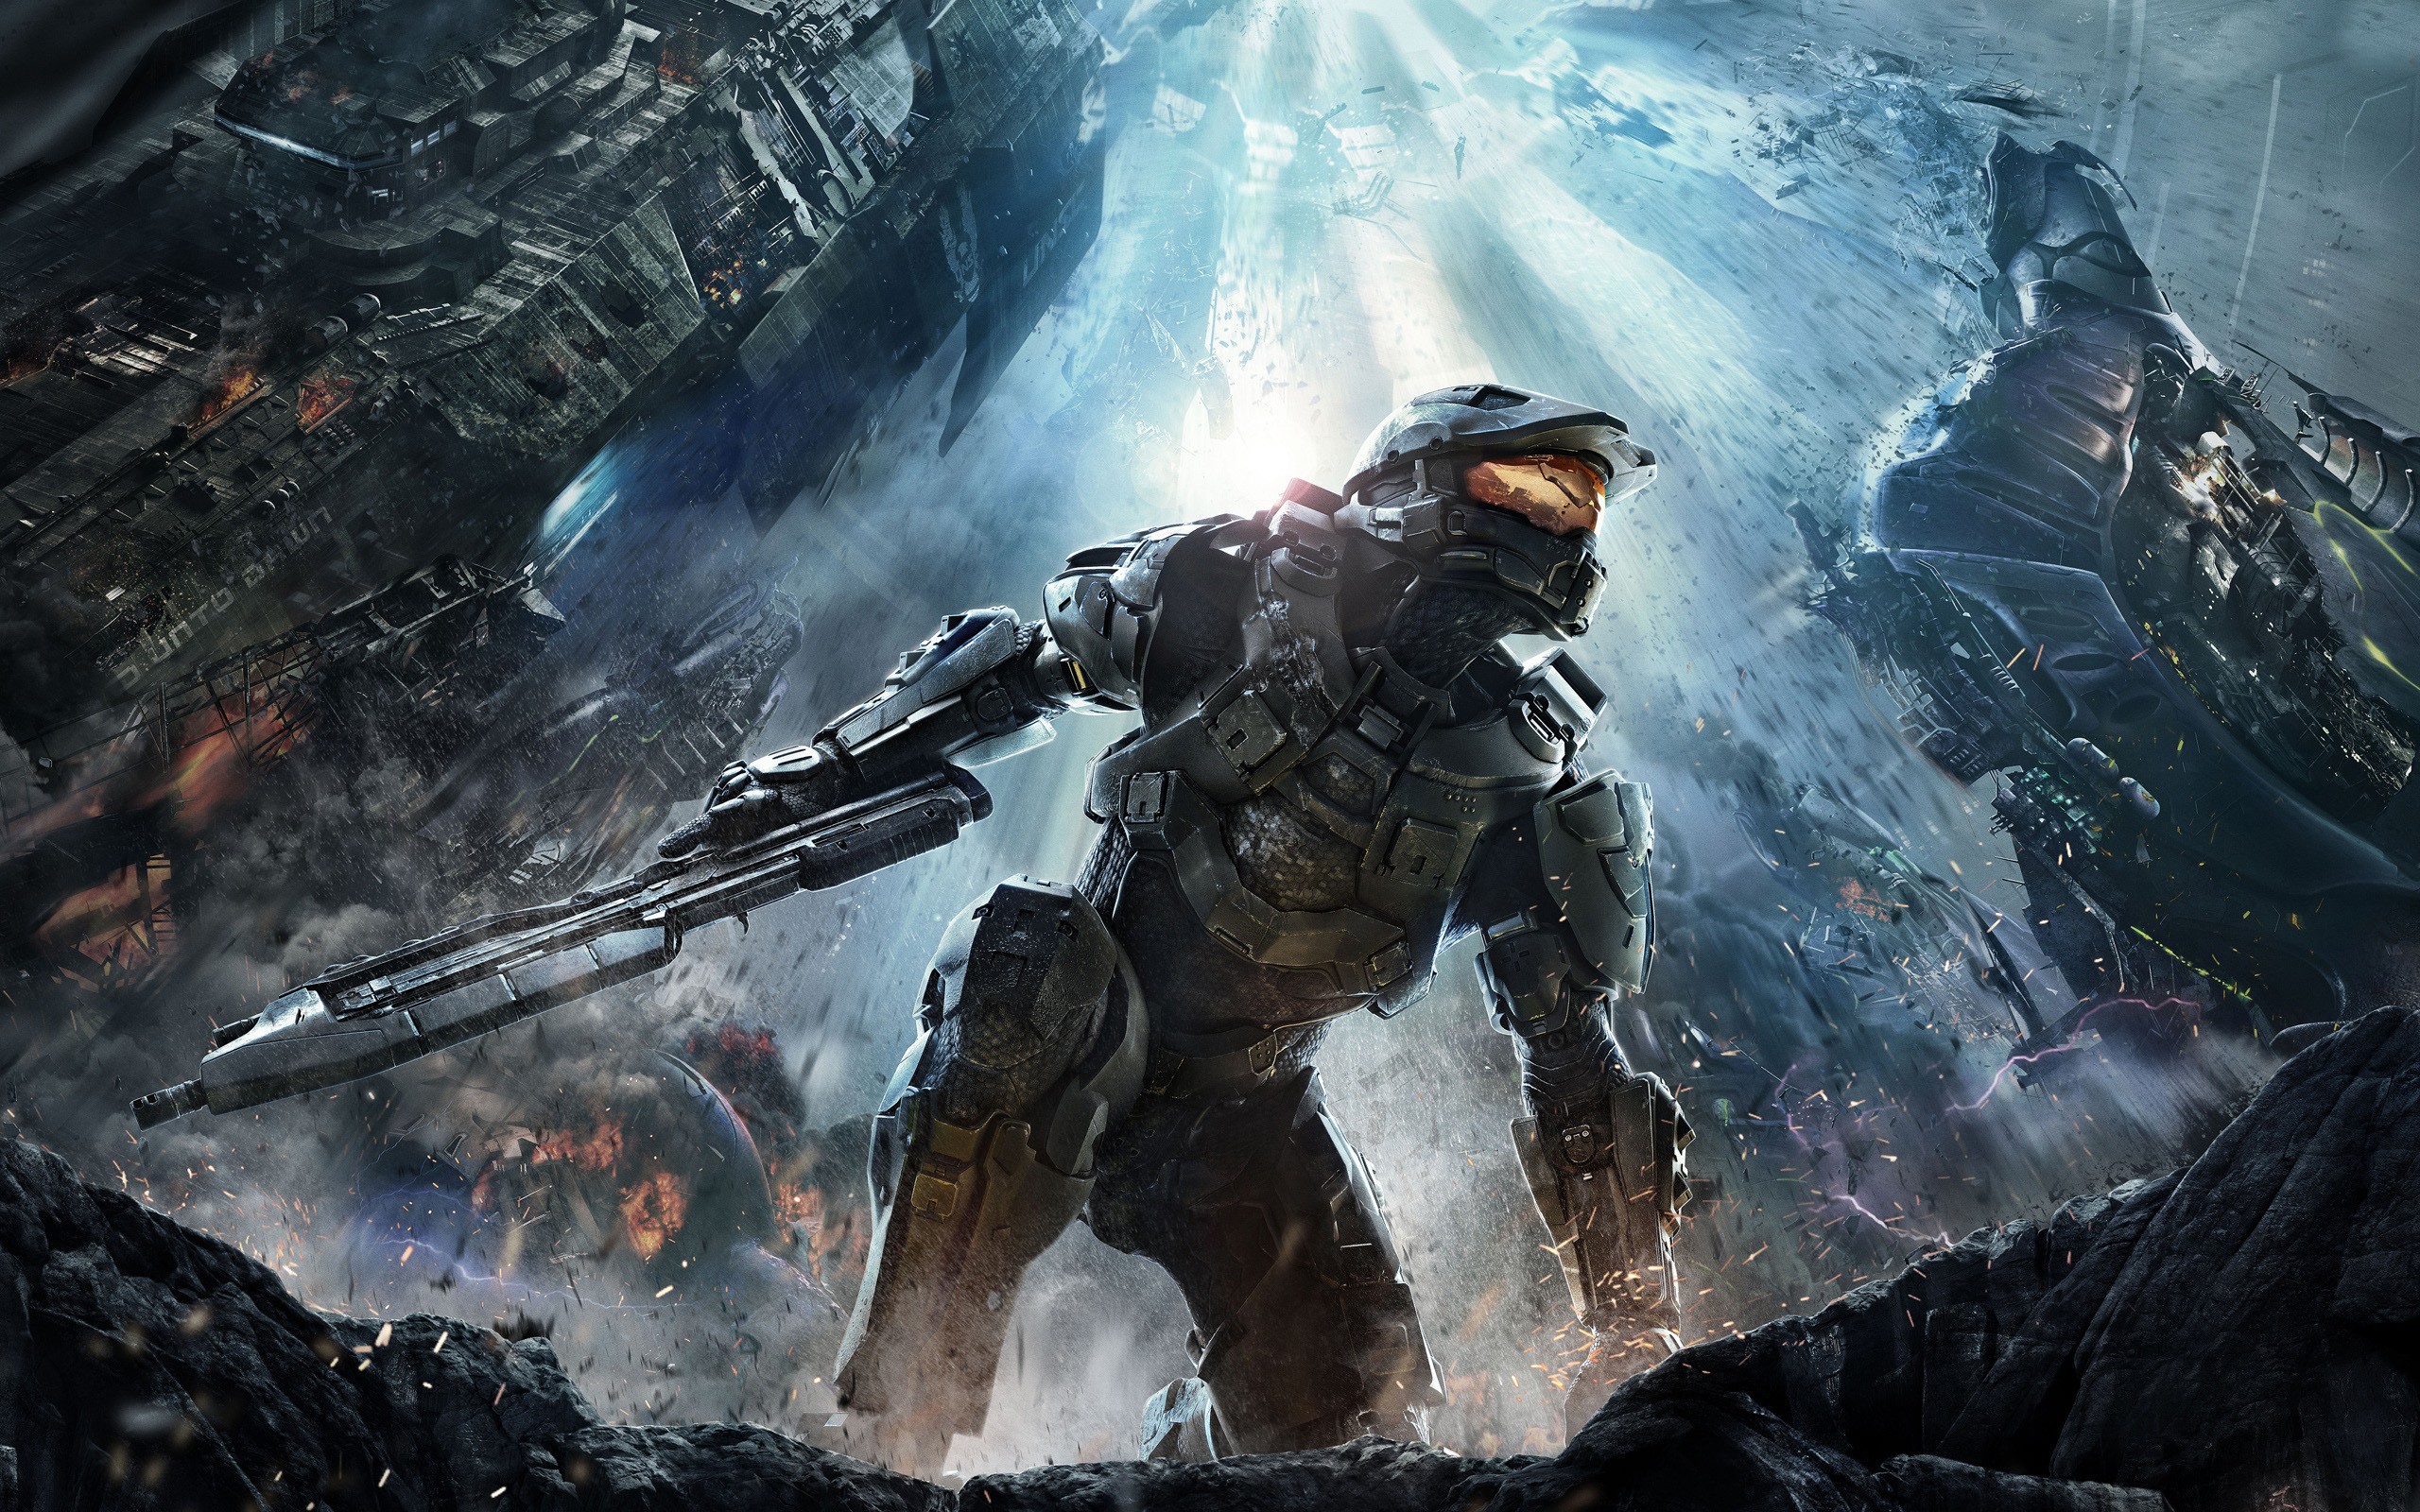 Halo HD Wallpaper Background Image Id